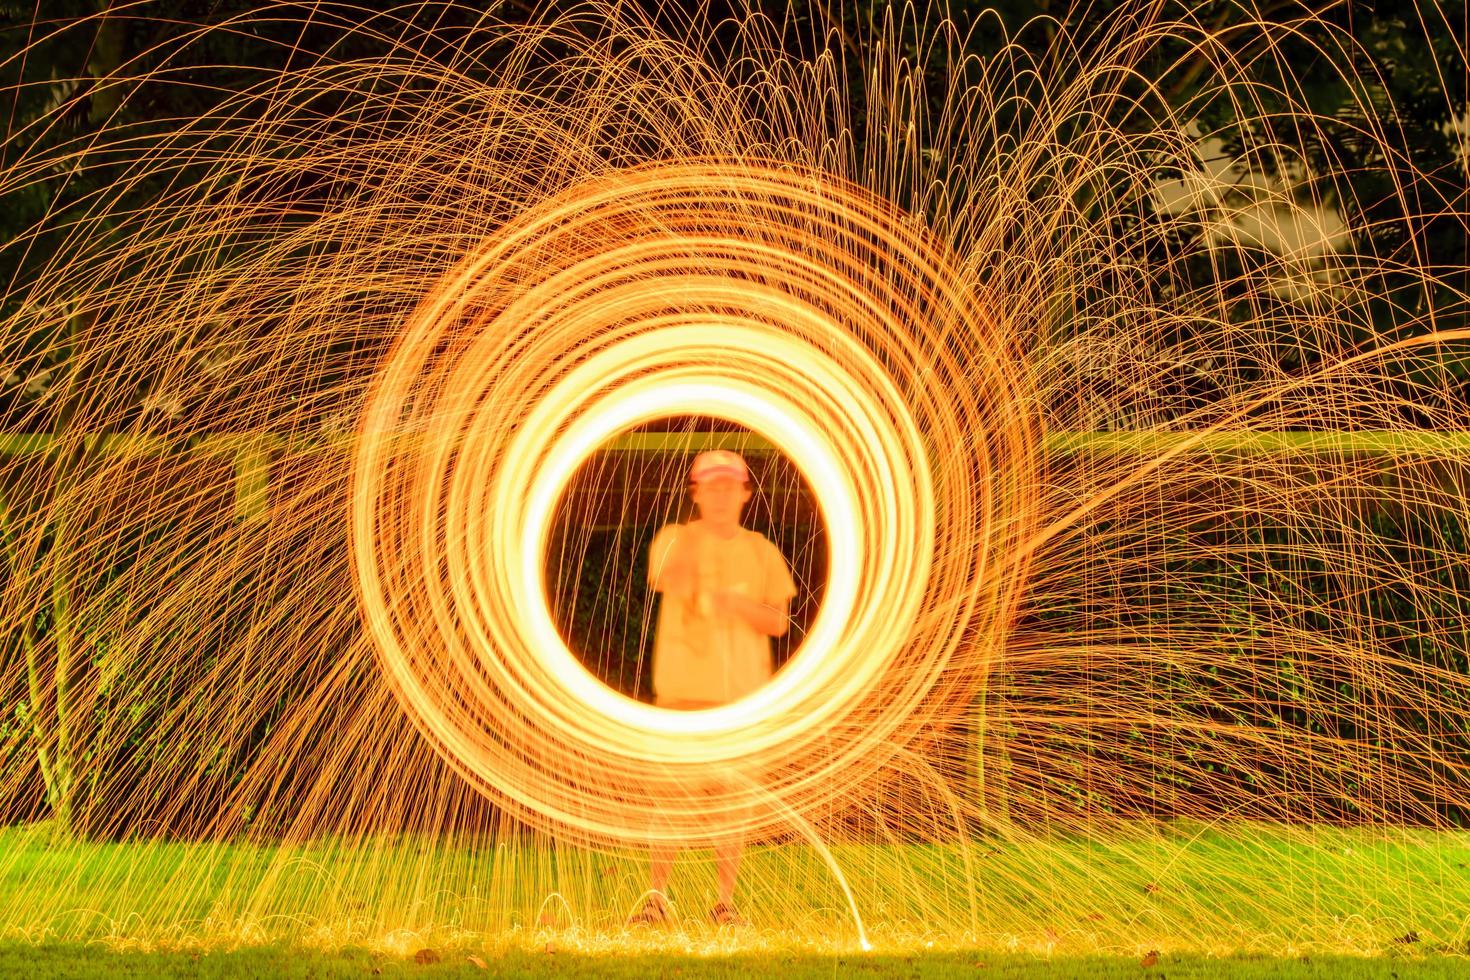 The fire dancing photo